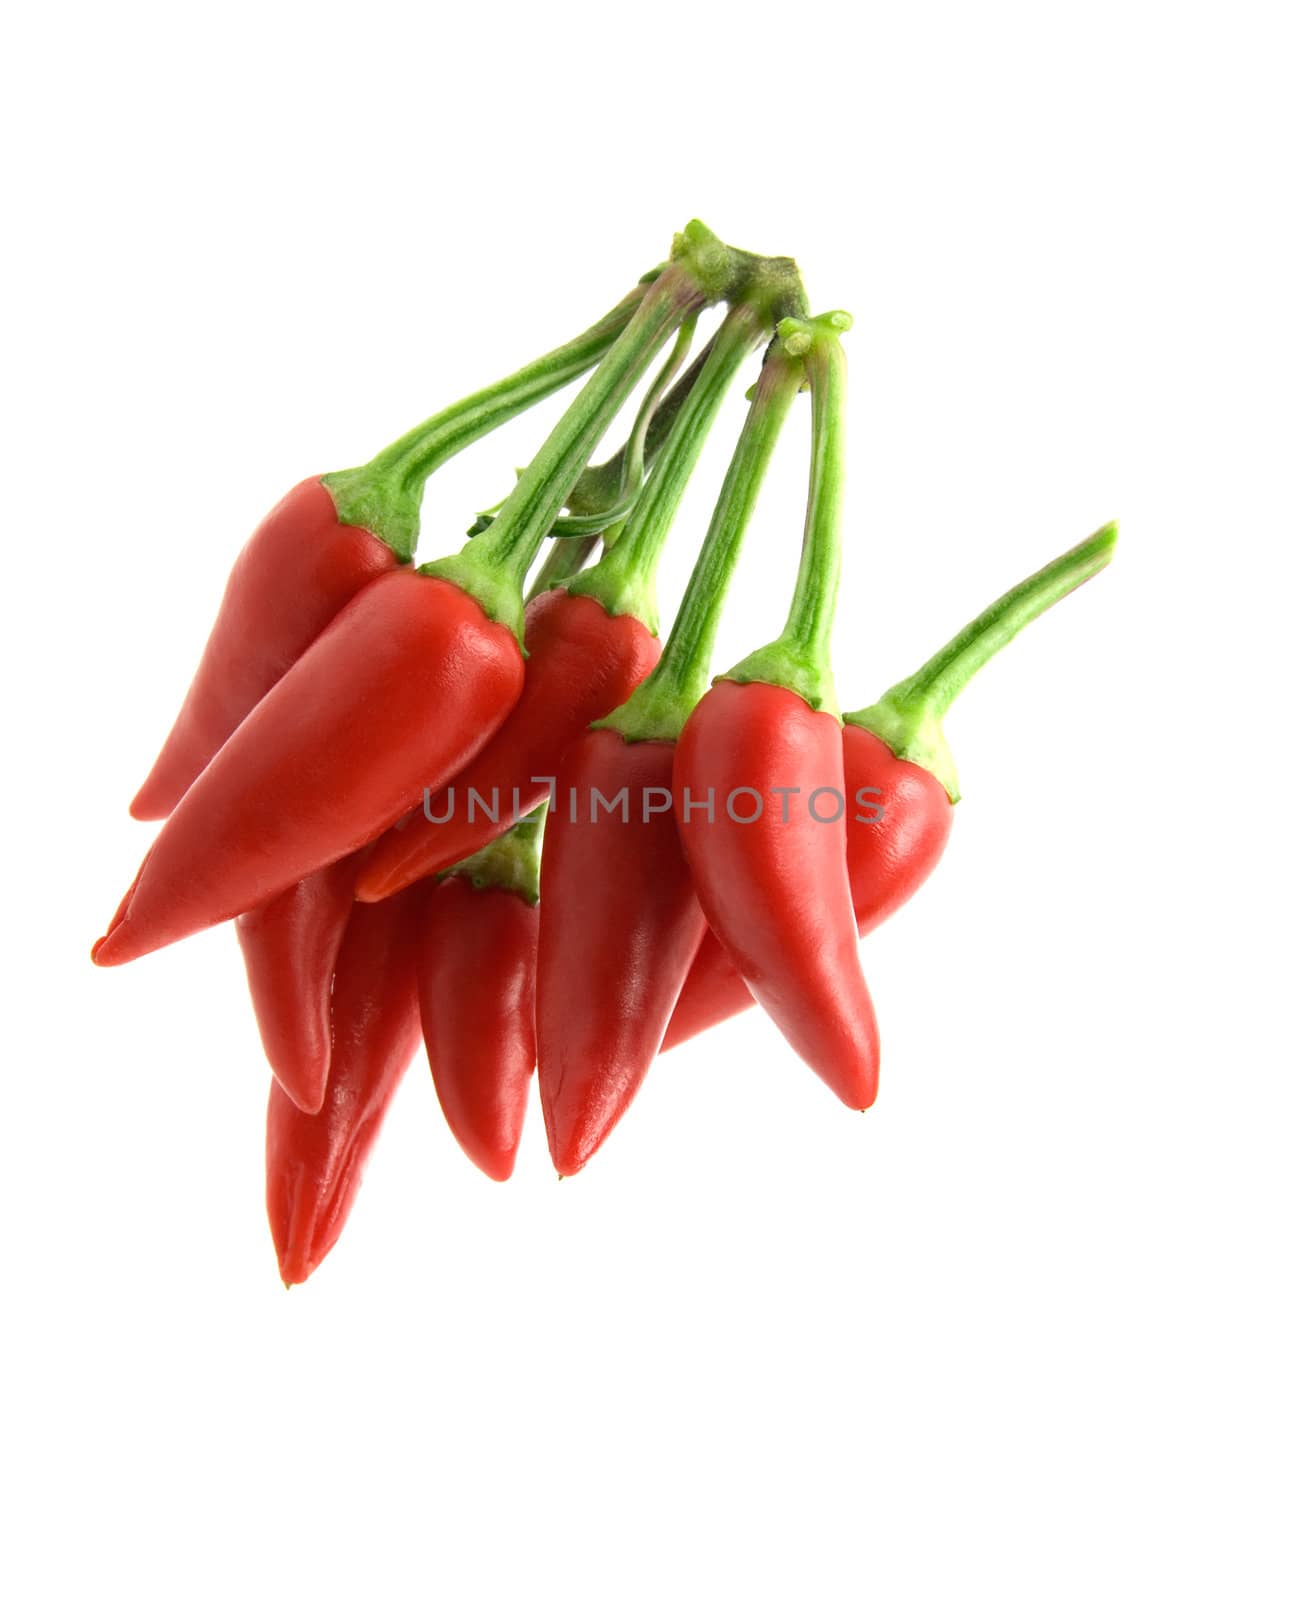 Bunch of Red hot chili pepper  by motorolka